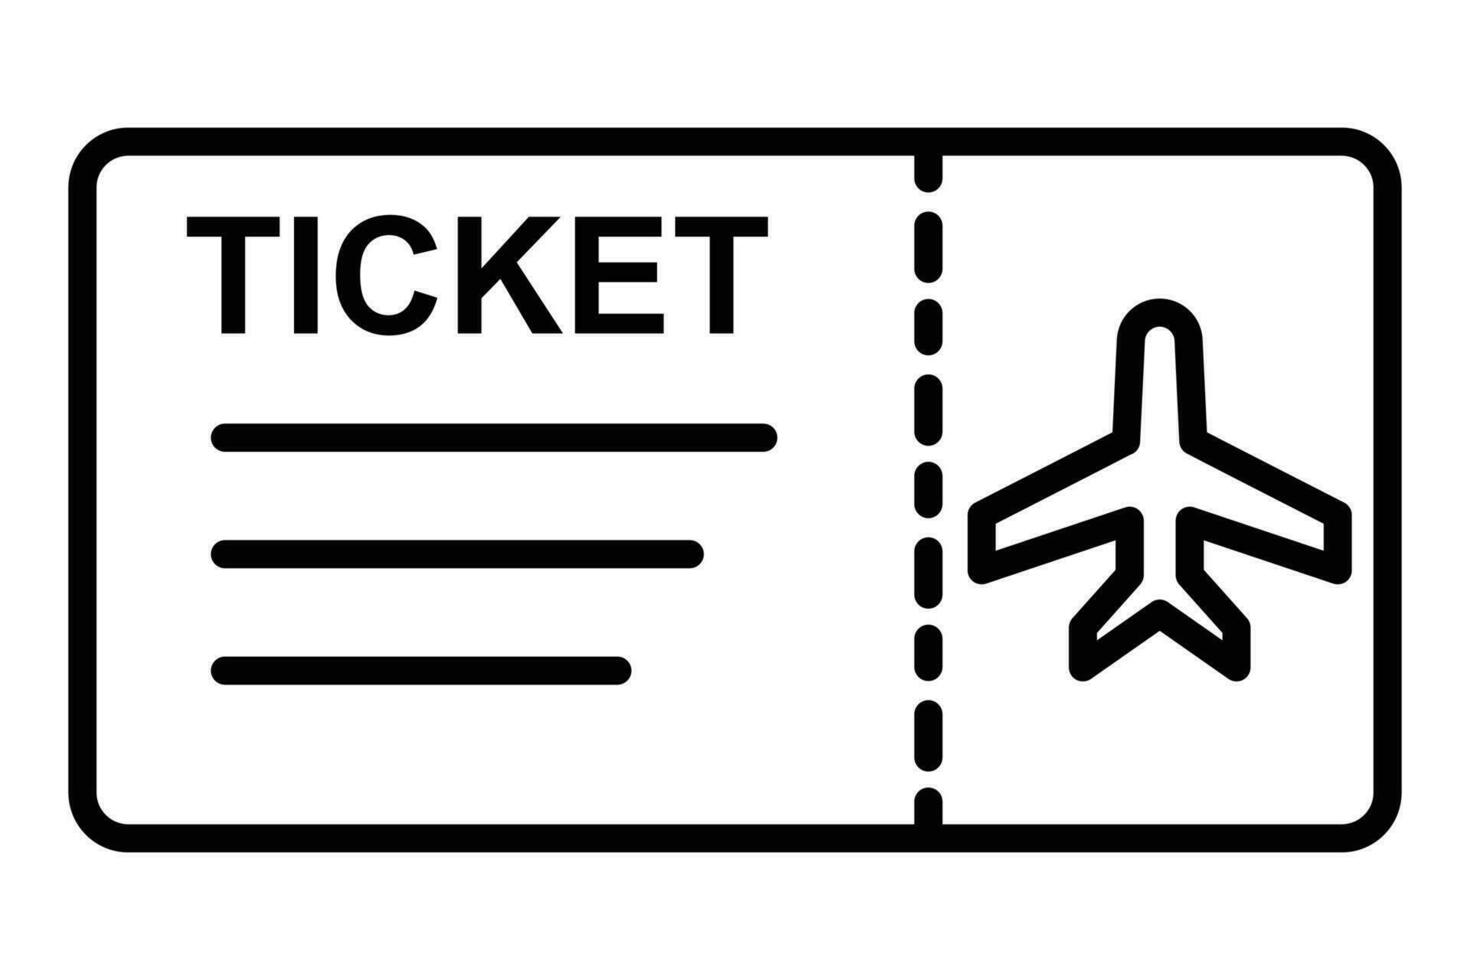 airplane ticket icon. icon related to ticket for air travel. line icon style. element illustration vector